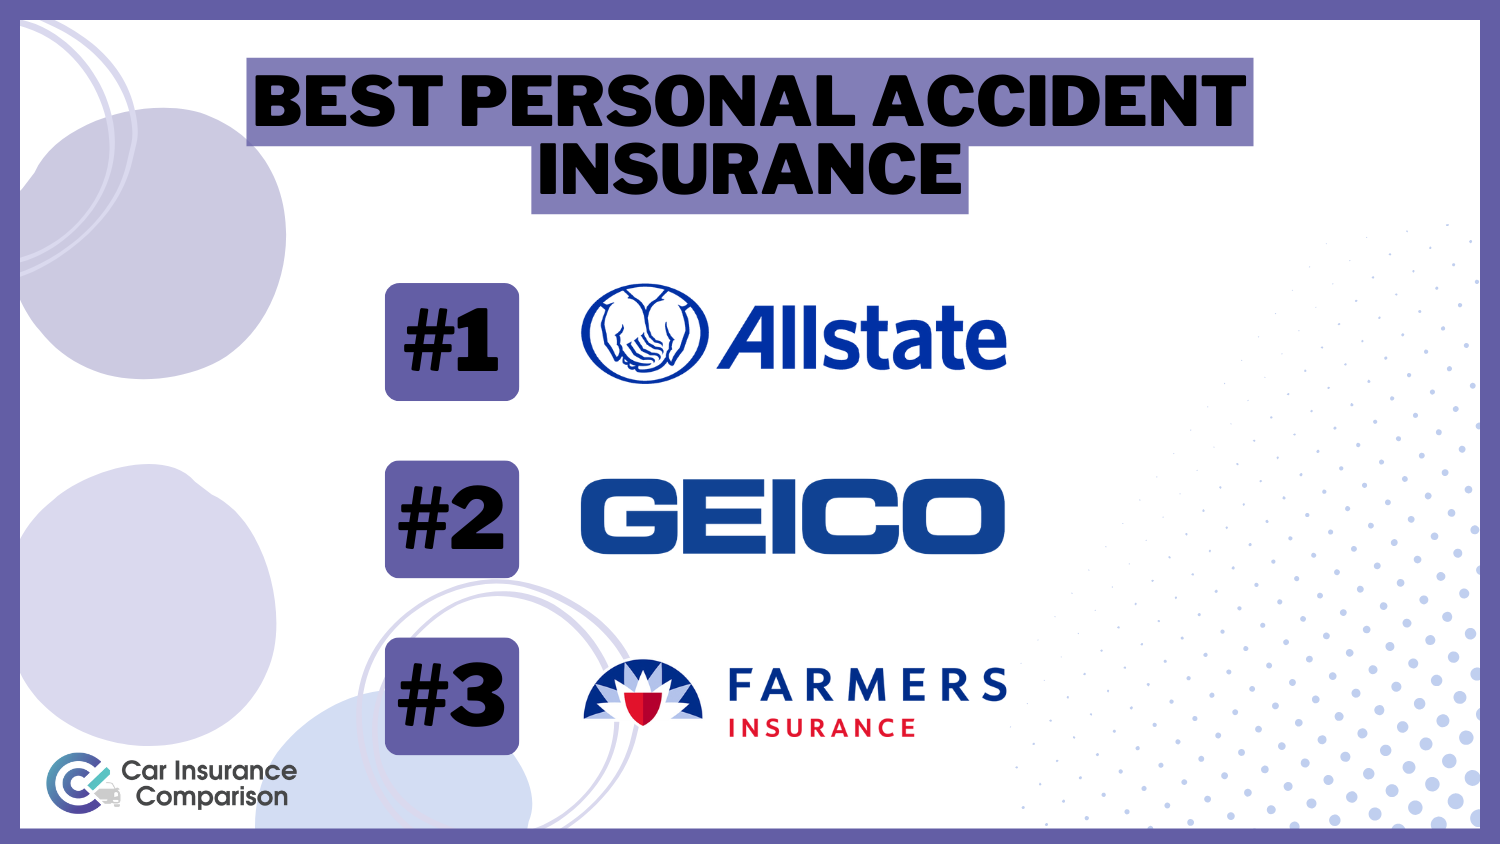 Best Personal Accident Insurance: Allstate, Geico, and Farmers